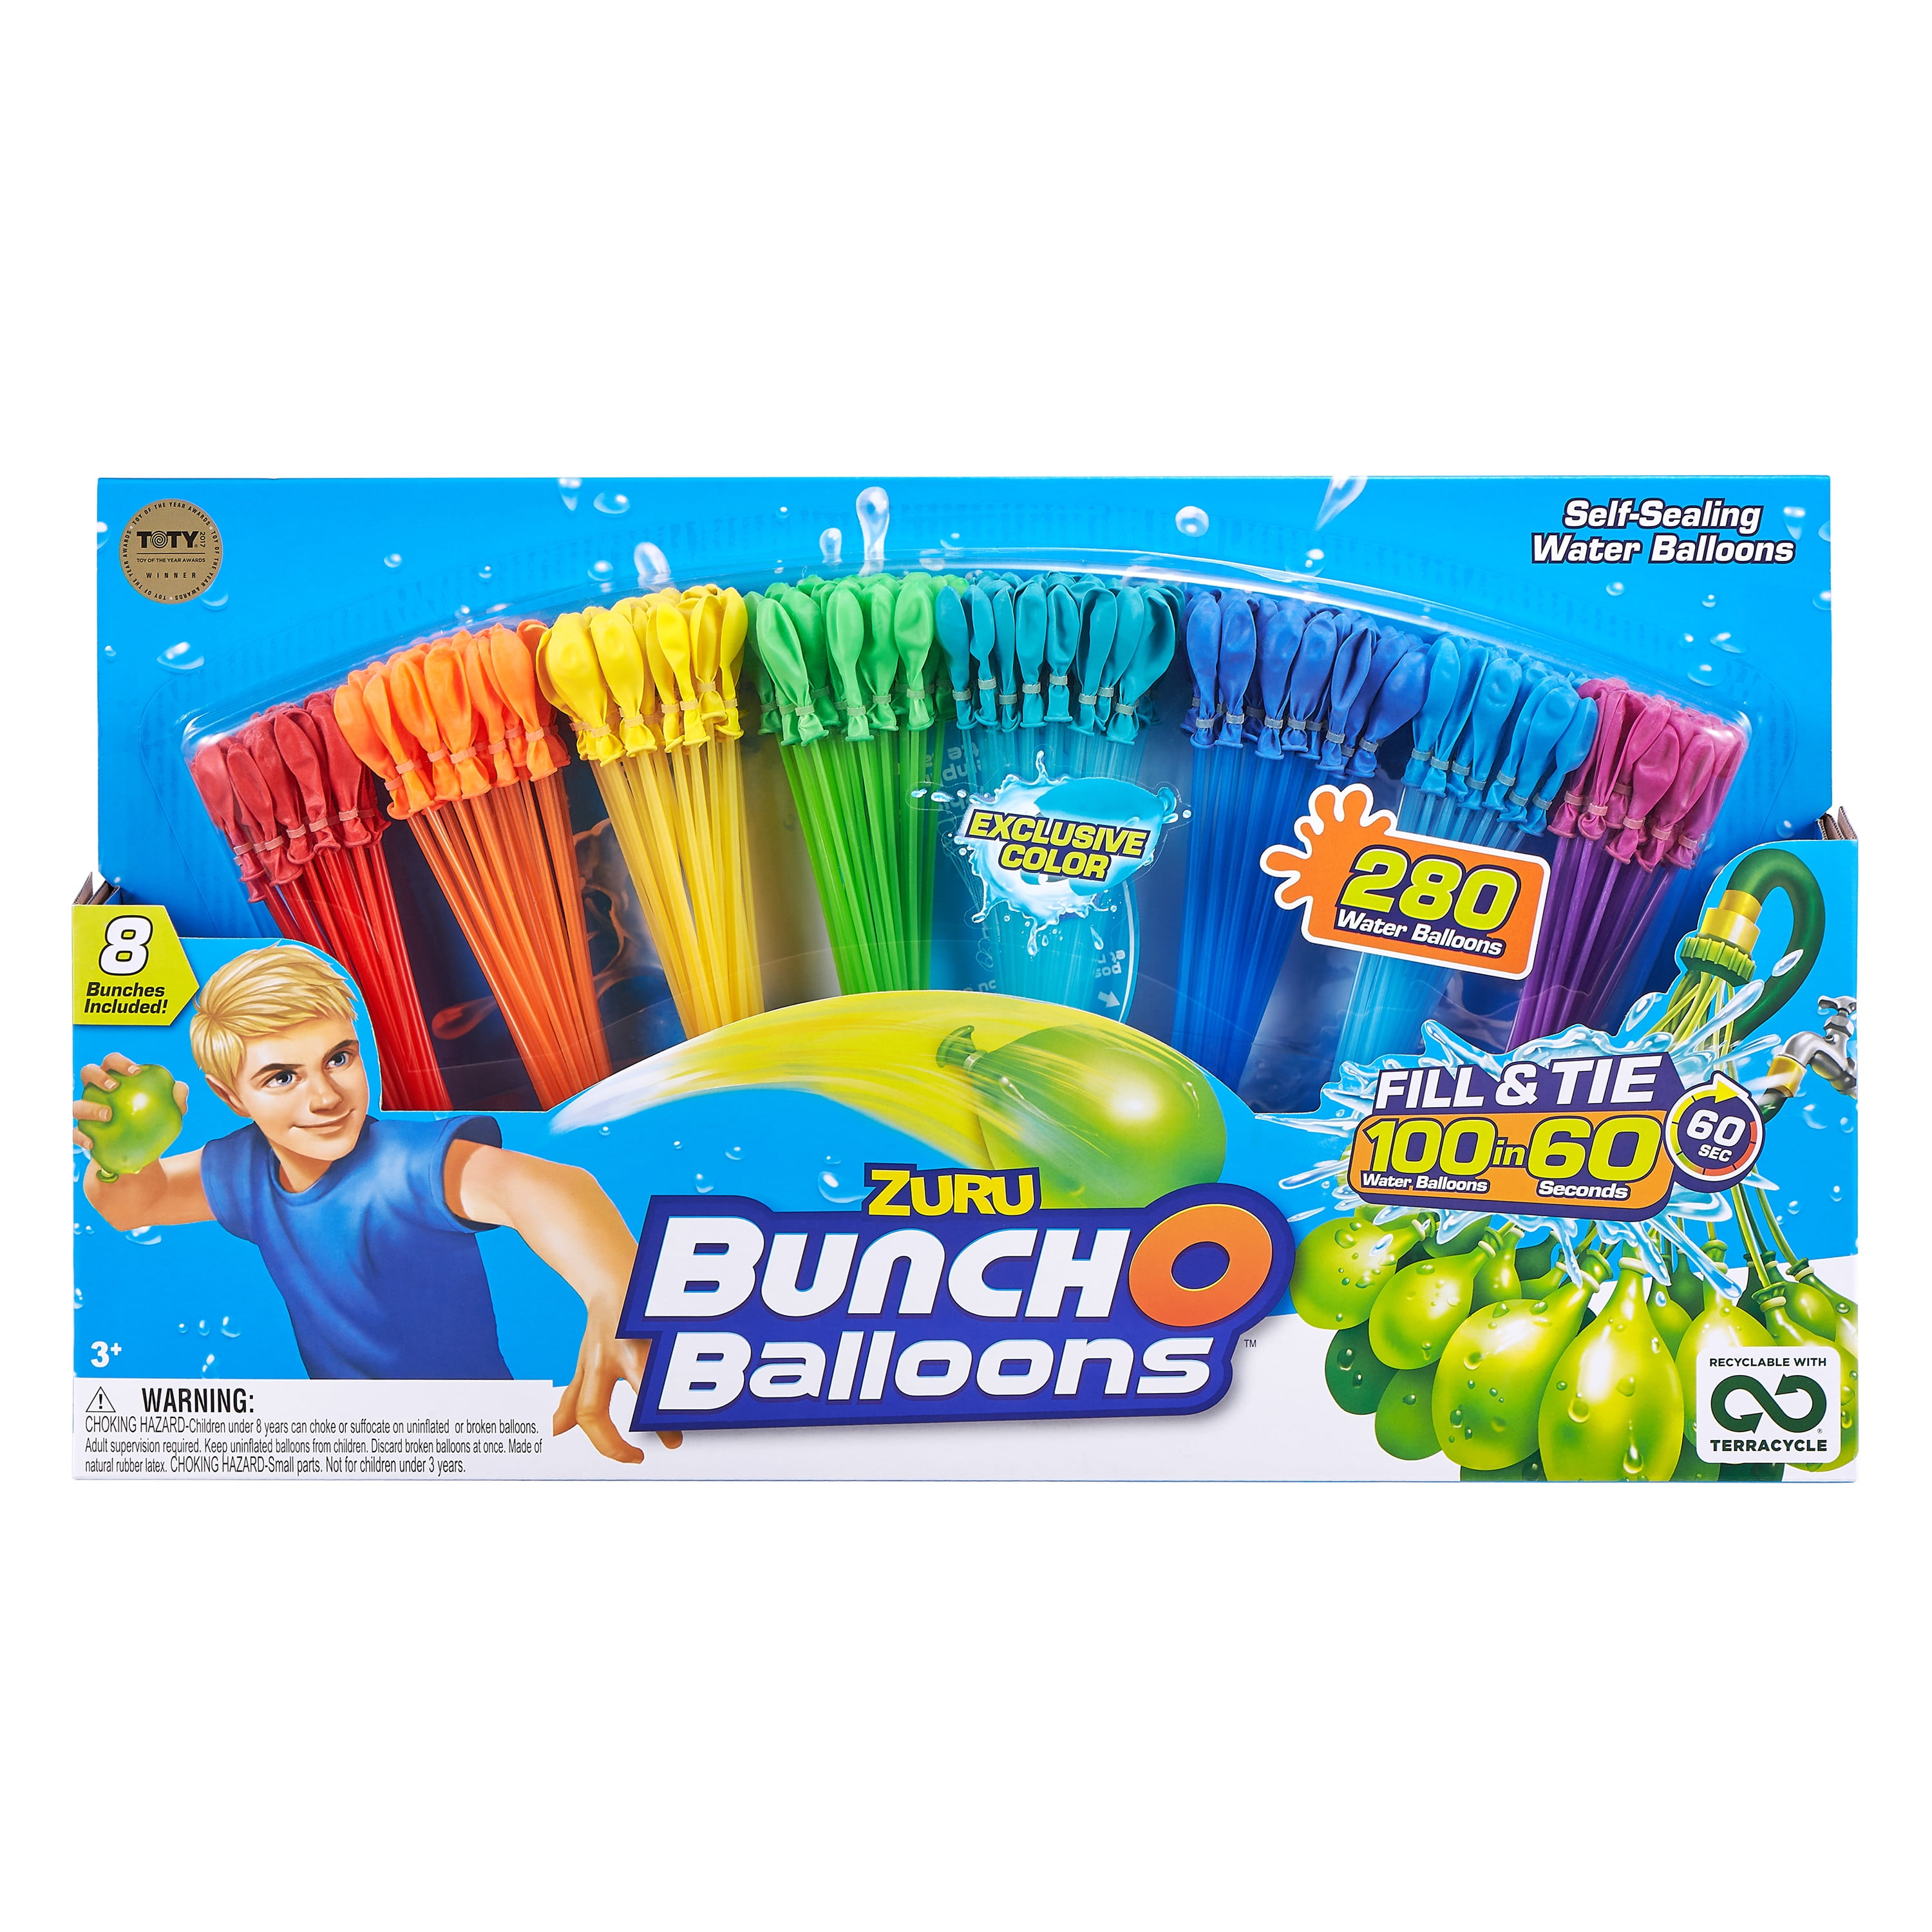 888 pcs 24 Bunch O Instant water Balloons US SELLER Self-Sealing,already tied 